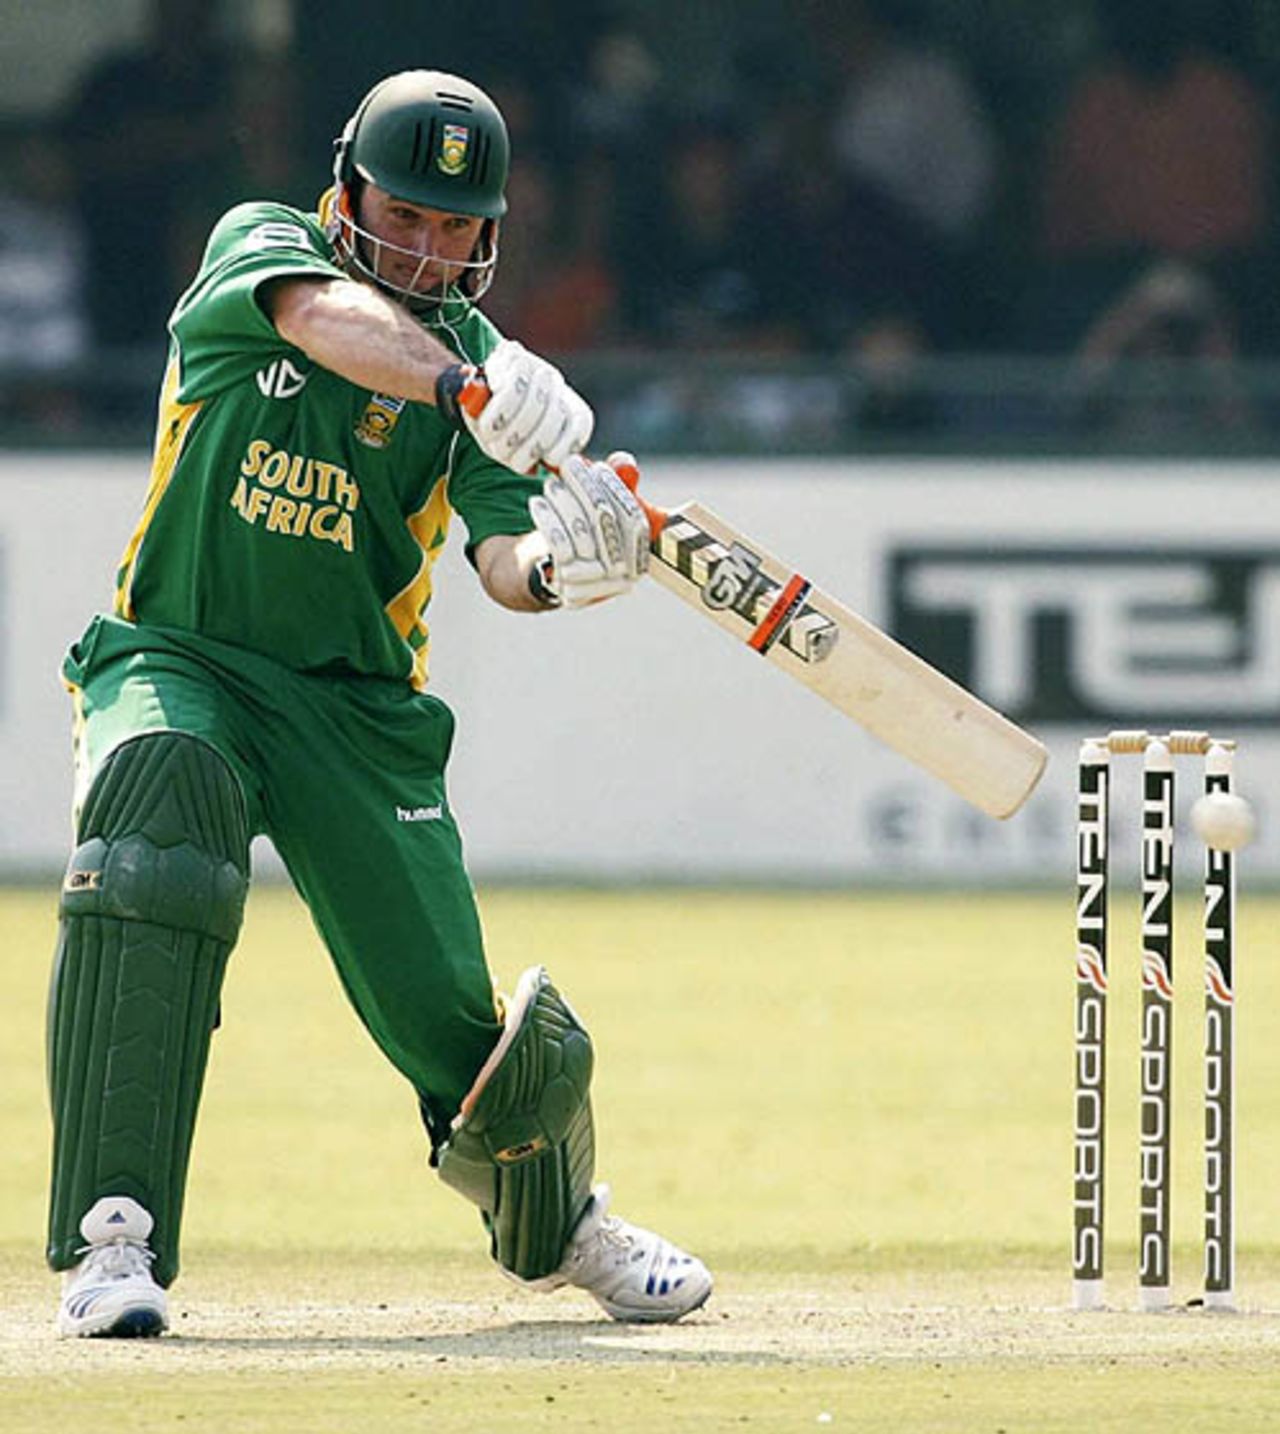 Graeme Smith missed a hundred by four runs, Zimbabwe v South Africa, 2nd ODI, Harare, August 25, 2007